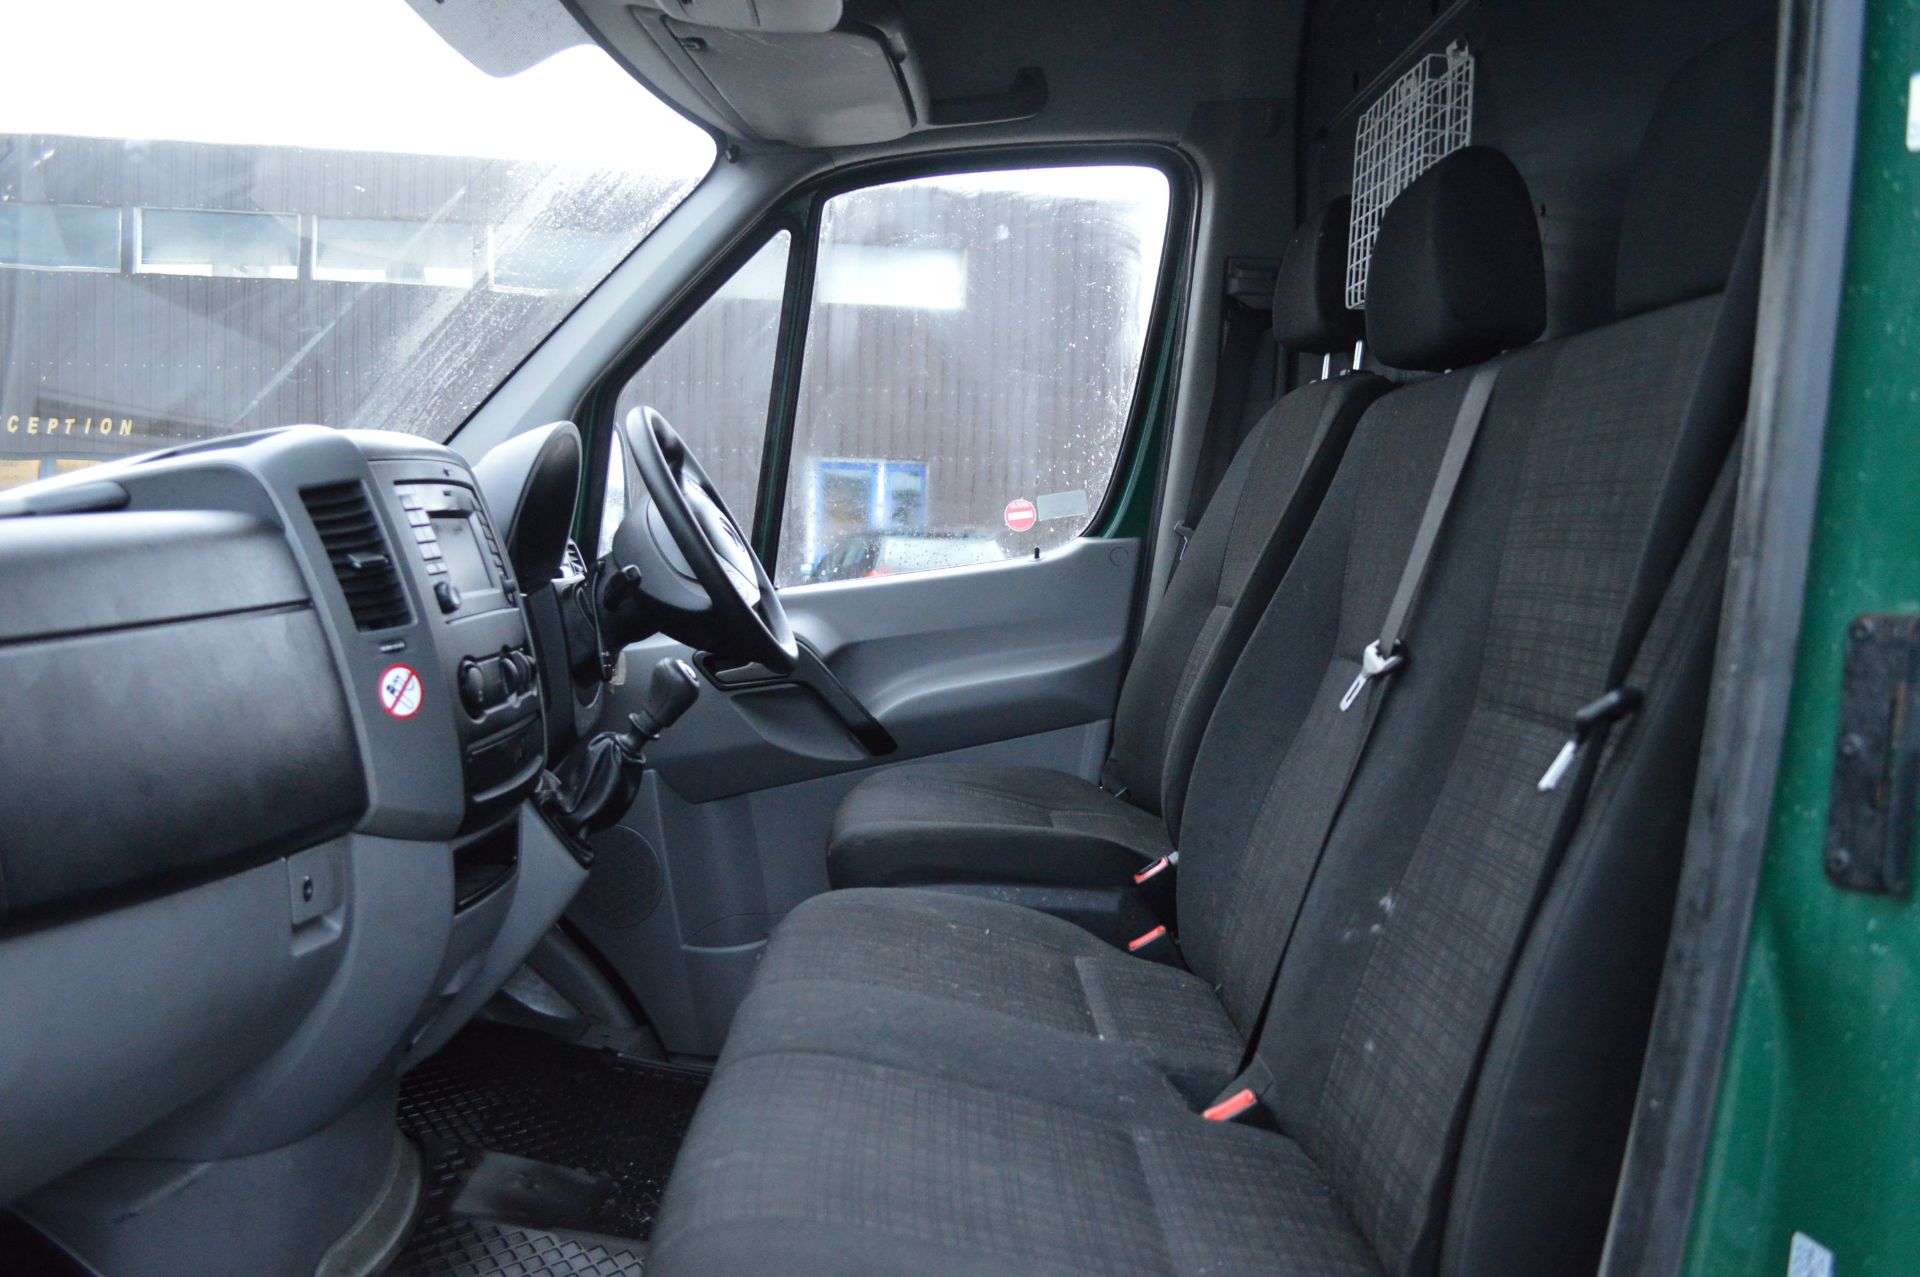 2014/64 REG MERCEDES-BENZ SPRINTER 313 CDI, 1 OWNER FROM NEW *NO VAT* - Image 12 of 25